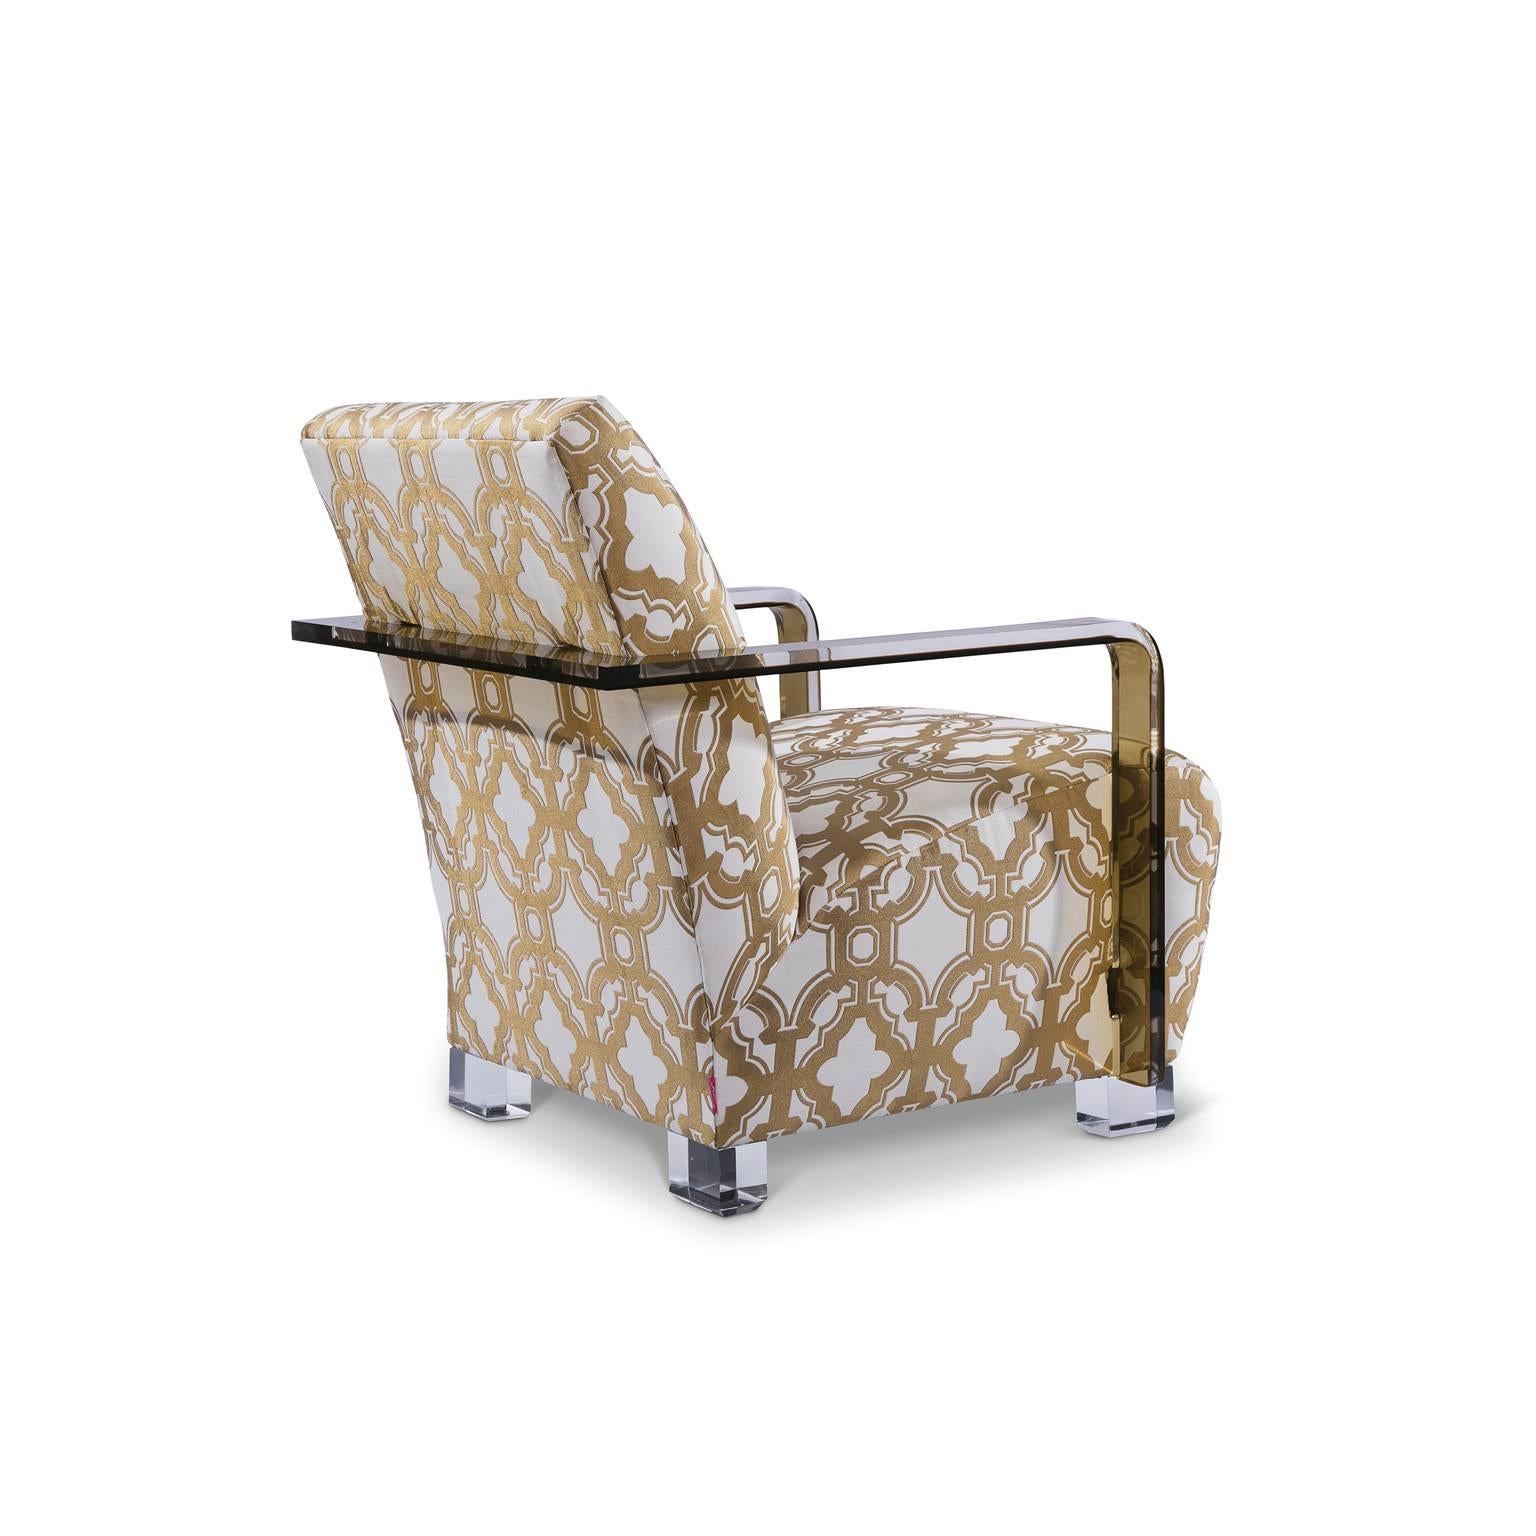 American Limited Edition Gold and Ivory Marrakesh Gate Armchair For Sale